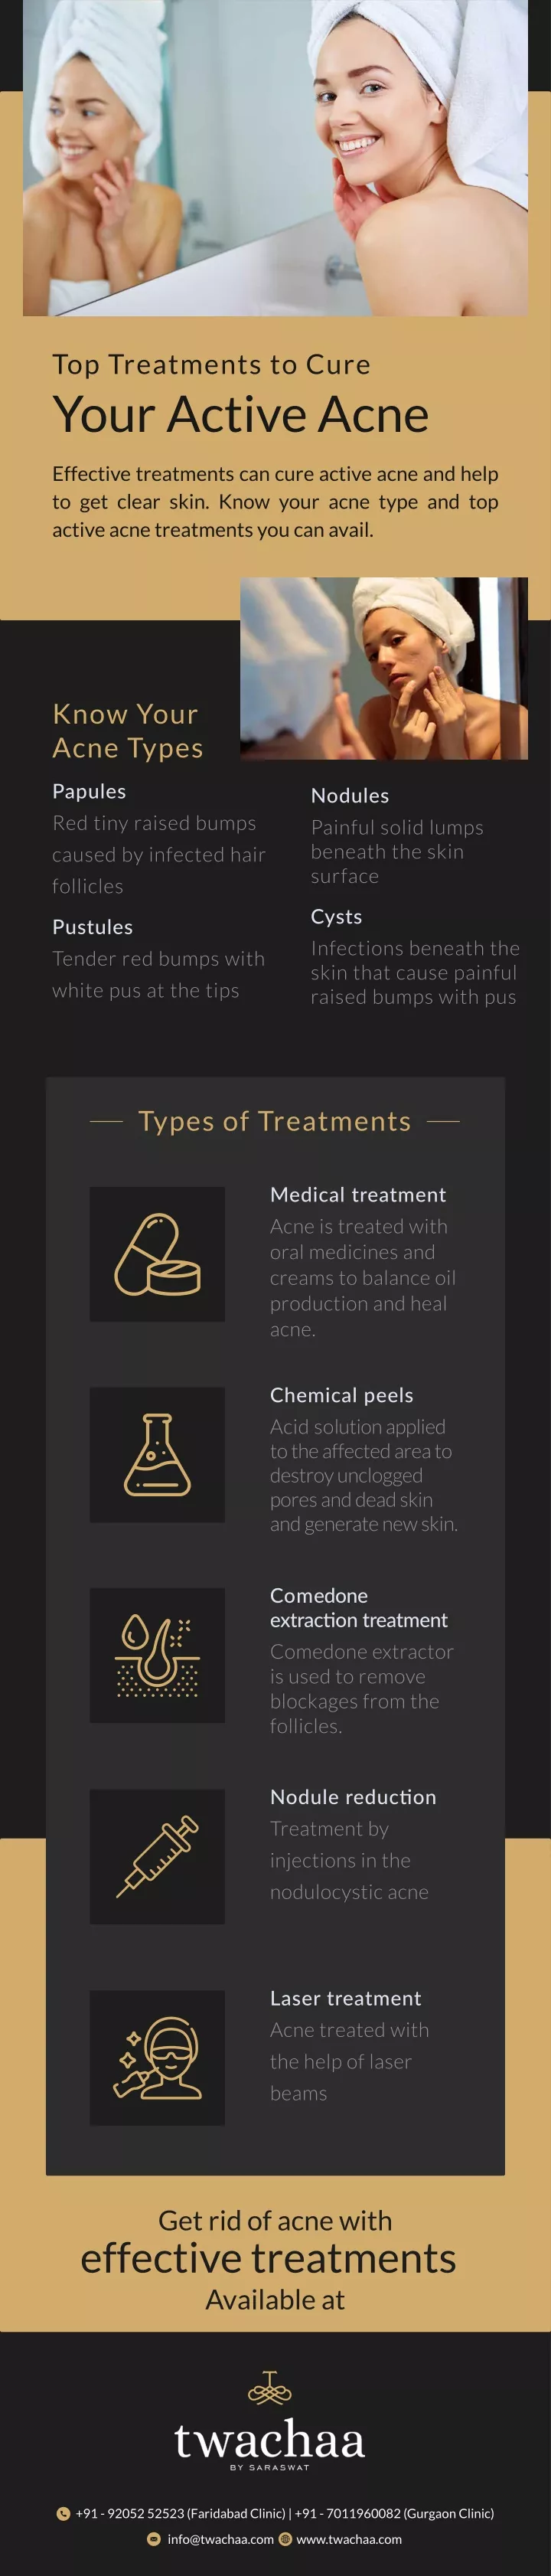 top treatments to cure your active acne